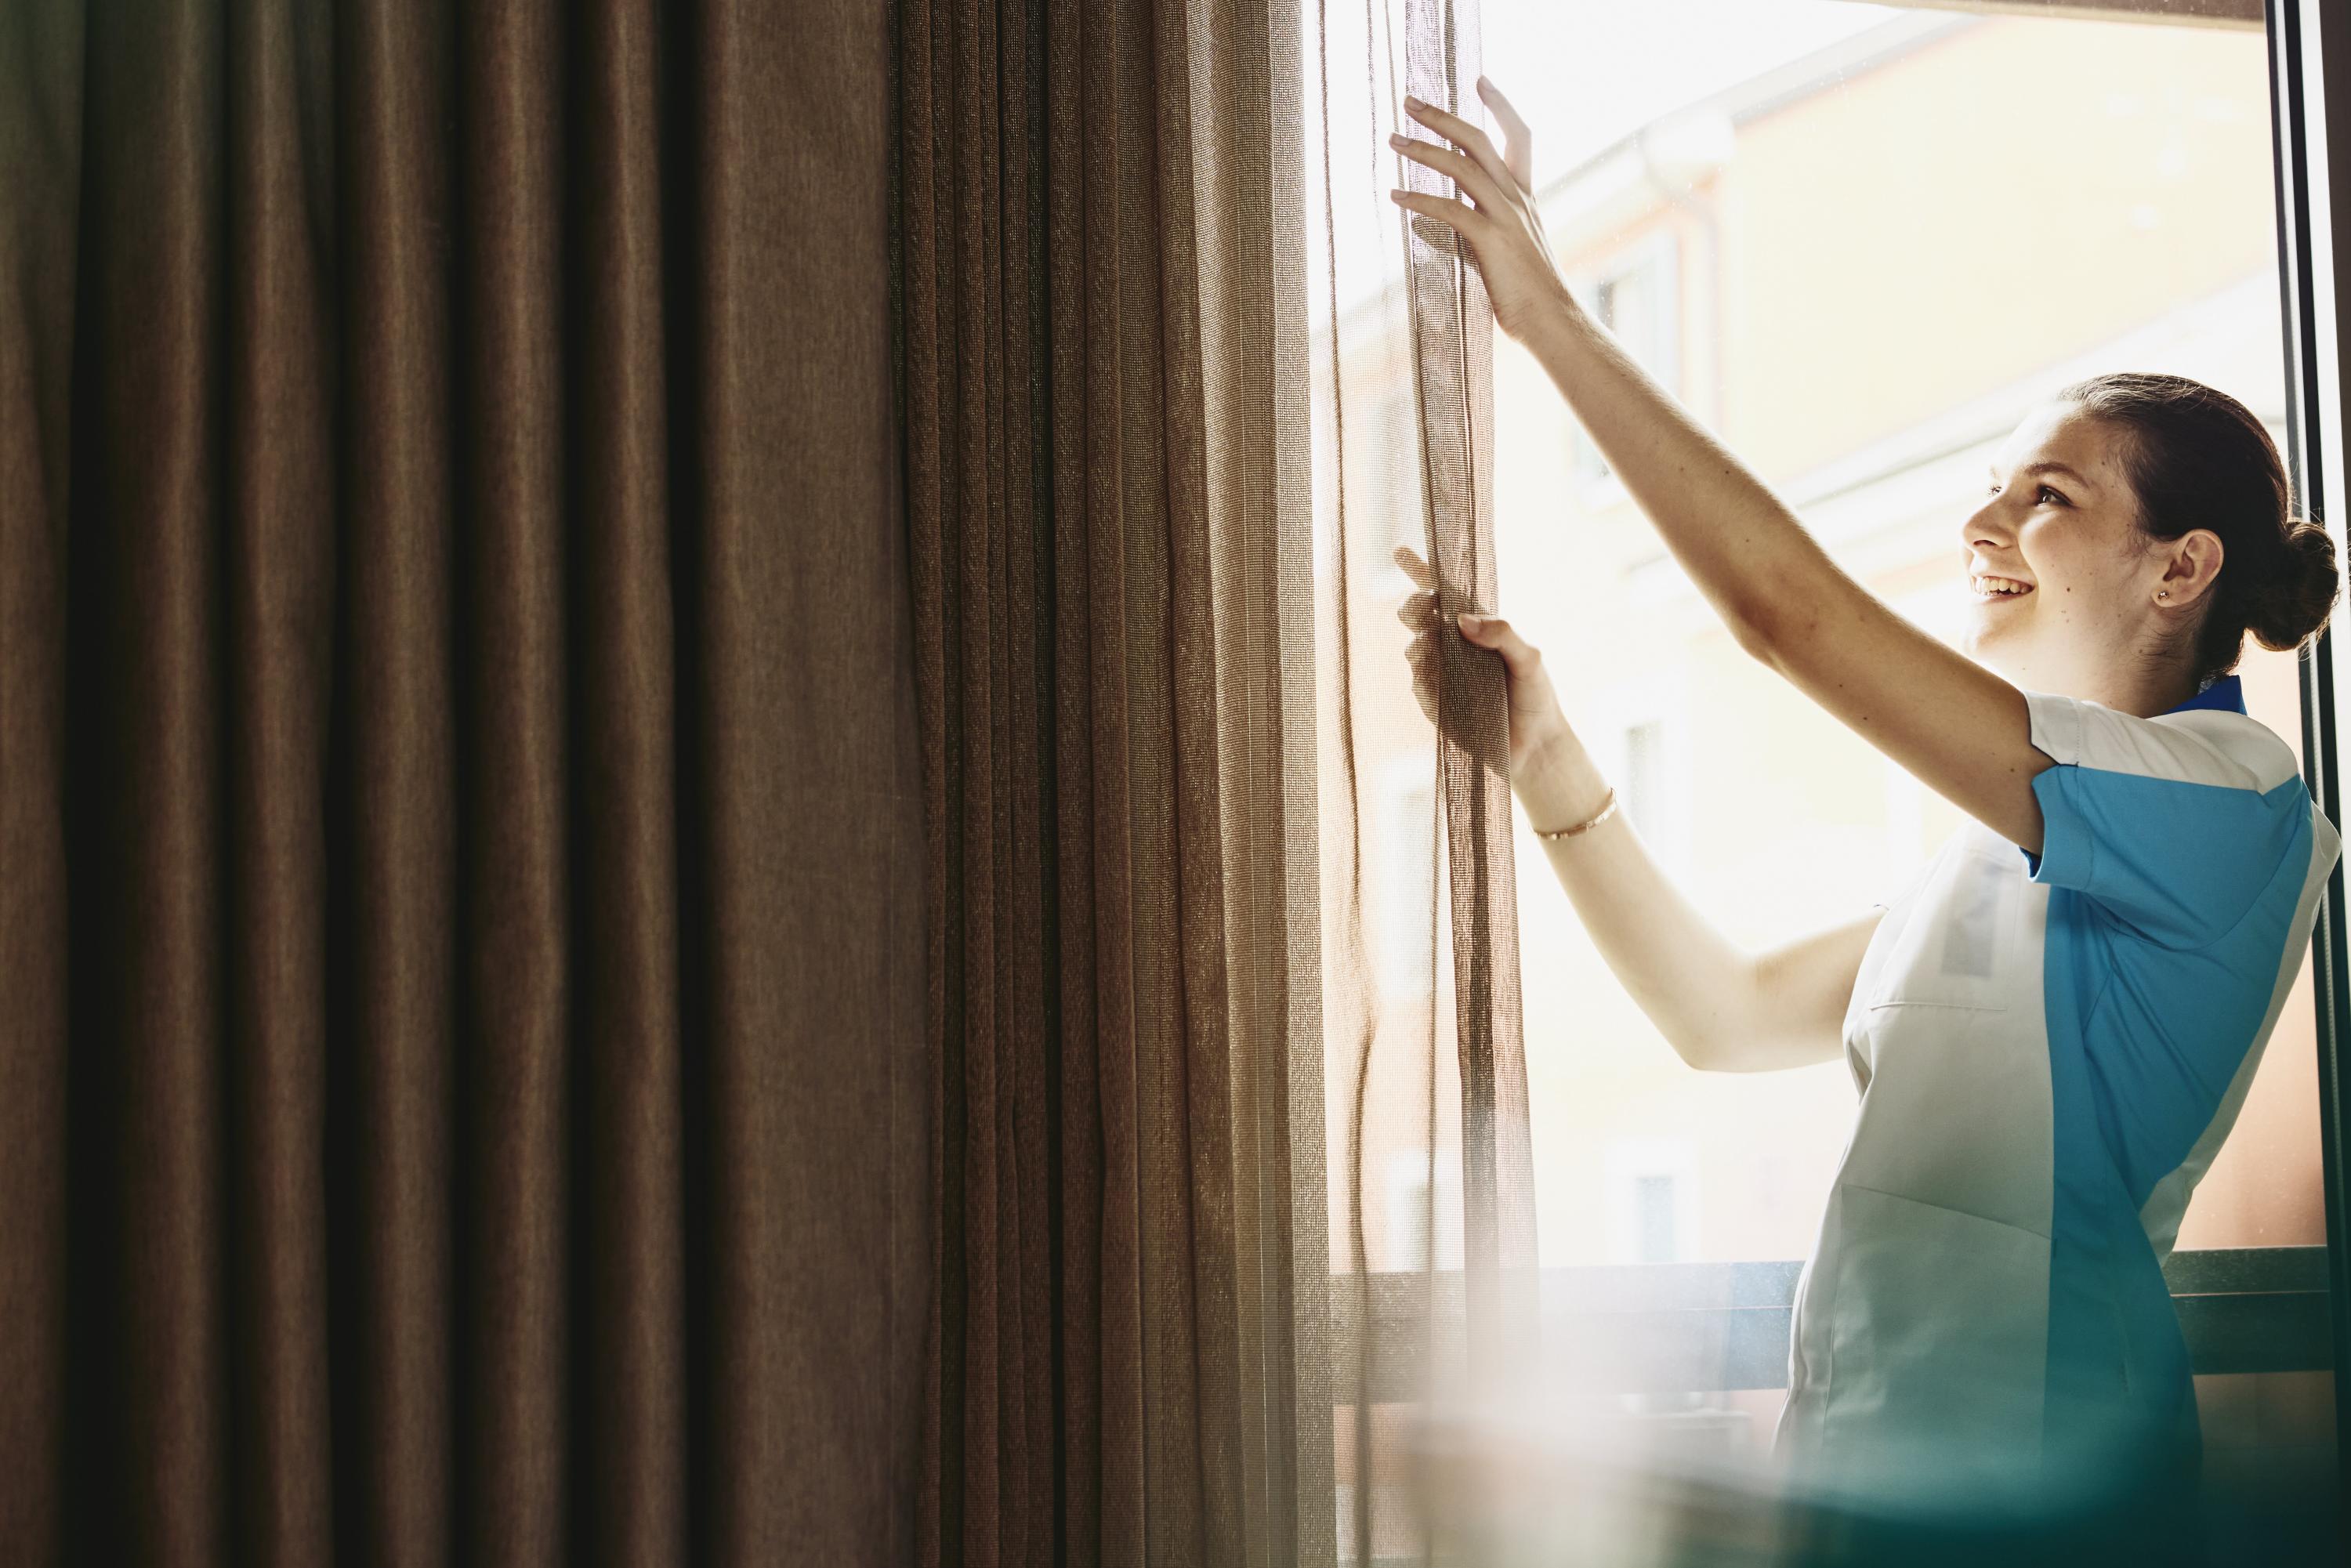 Smiling woman closing/opening curtains in a hotel room.